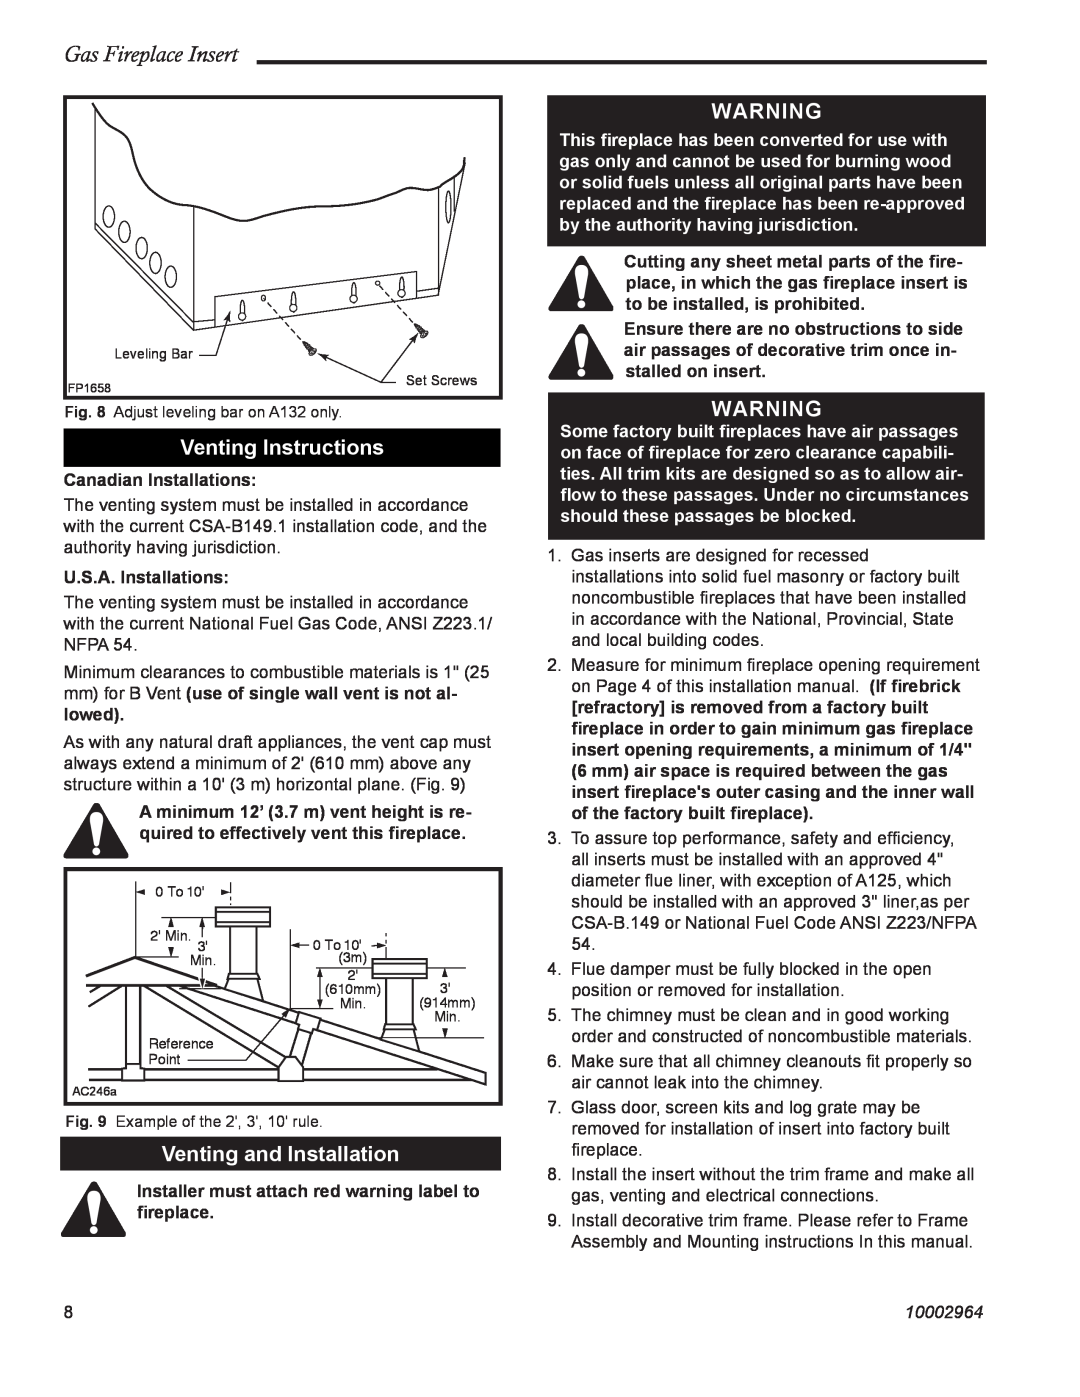 CFM Corporation A125, A132 manual Venting Instructions, Venting and Installation, Gas Fireplace Insert, 10002964 